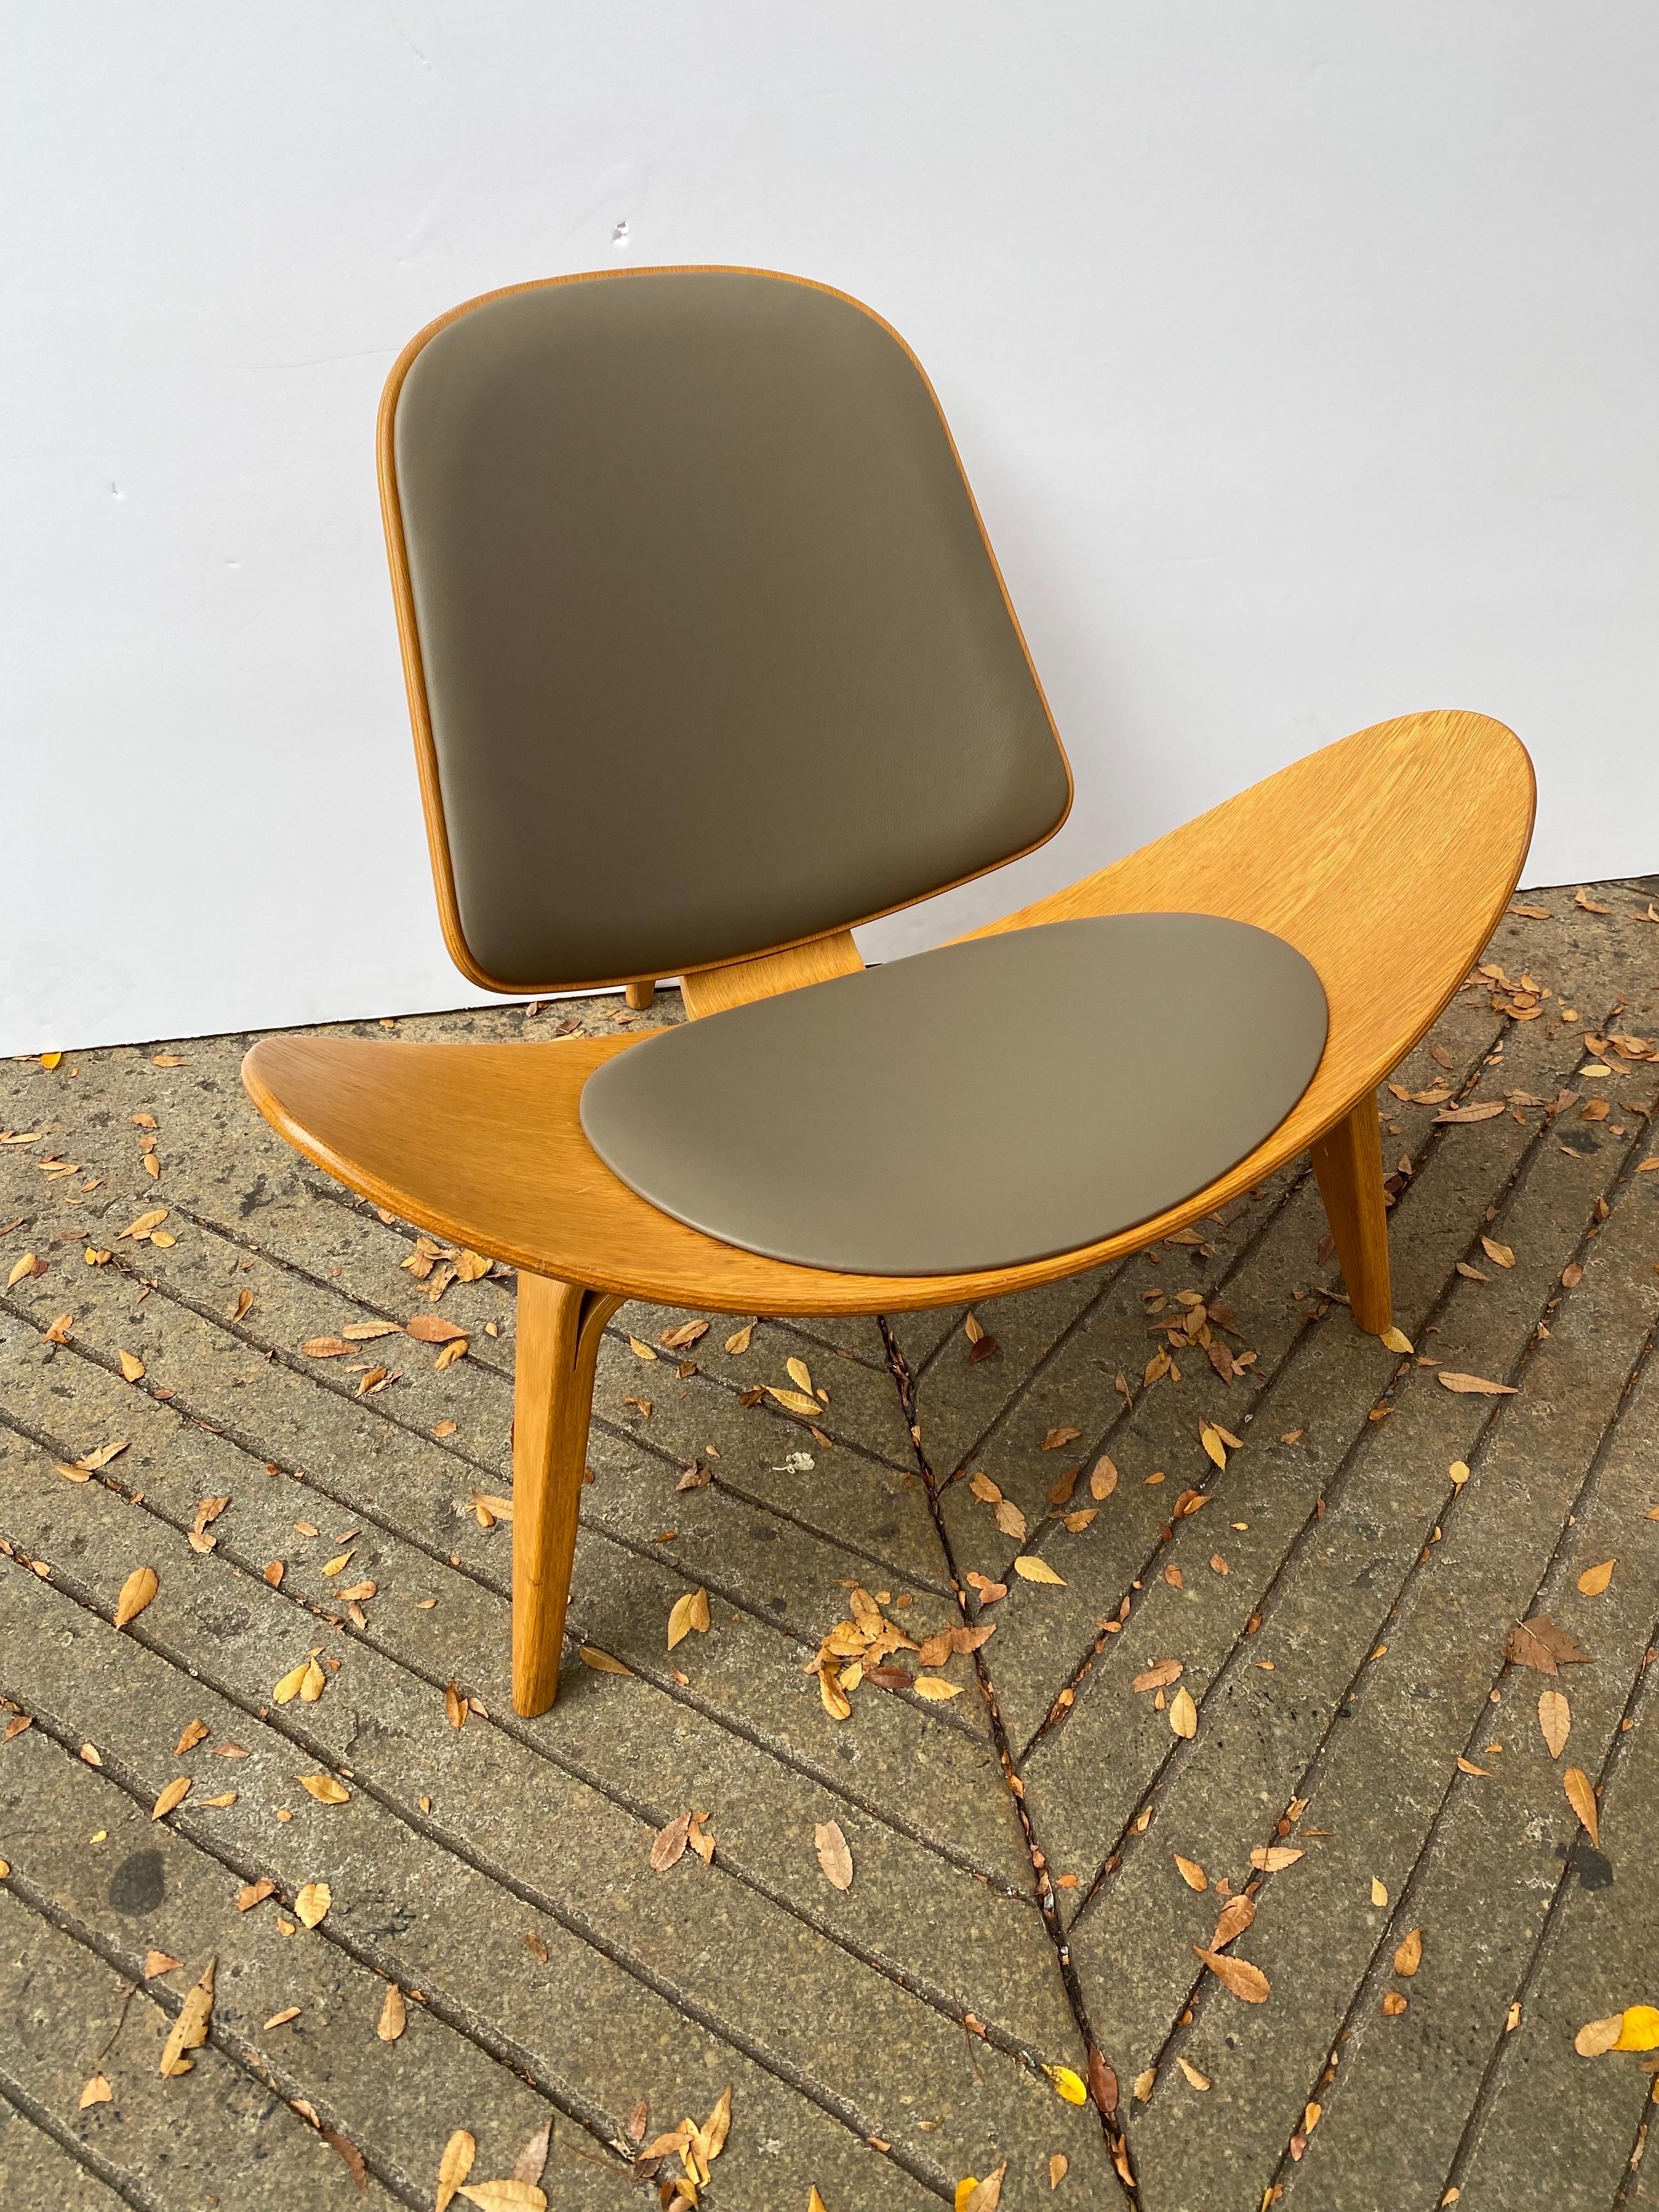 Hans Wegner shell chair, Model CH07 for Carl Hansen. Design dates to early 1960's. Carl Hansen started to produce chair in the 1990's Chair in nice shape with new leather upholstery. Oak is very clean! Very comfortable and Stable Chair!